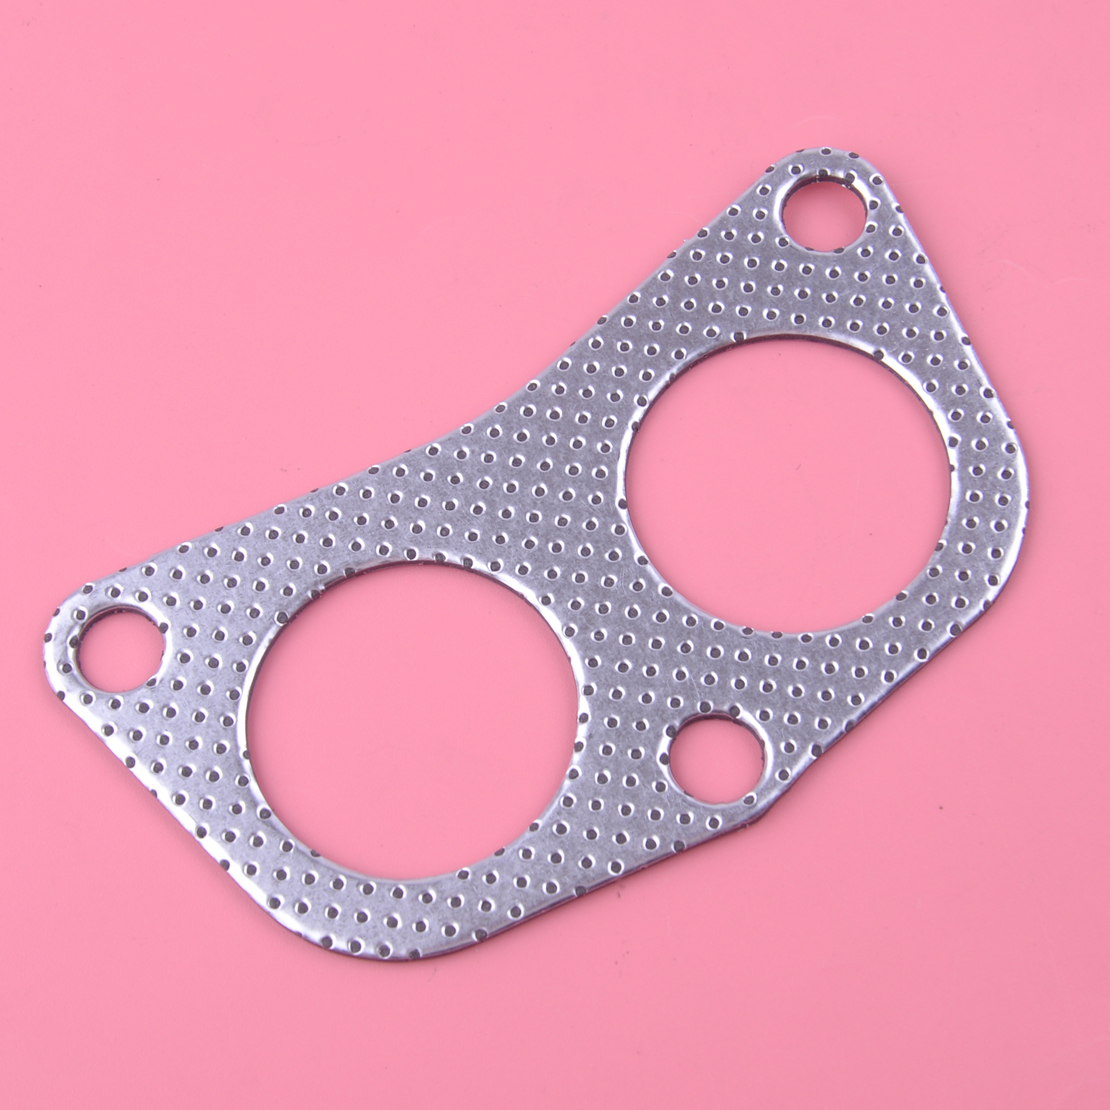 Details about   Fit For Honda D15-B18 Exhaust Header Downpipe Collector Flange Gasket 3 Bolt A2